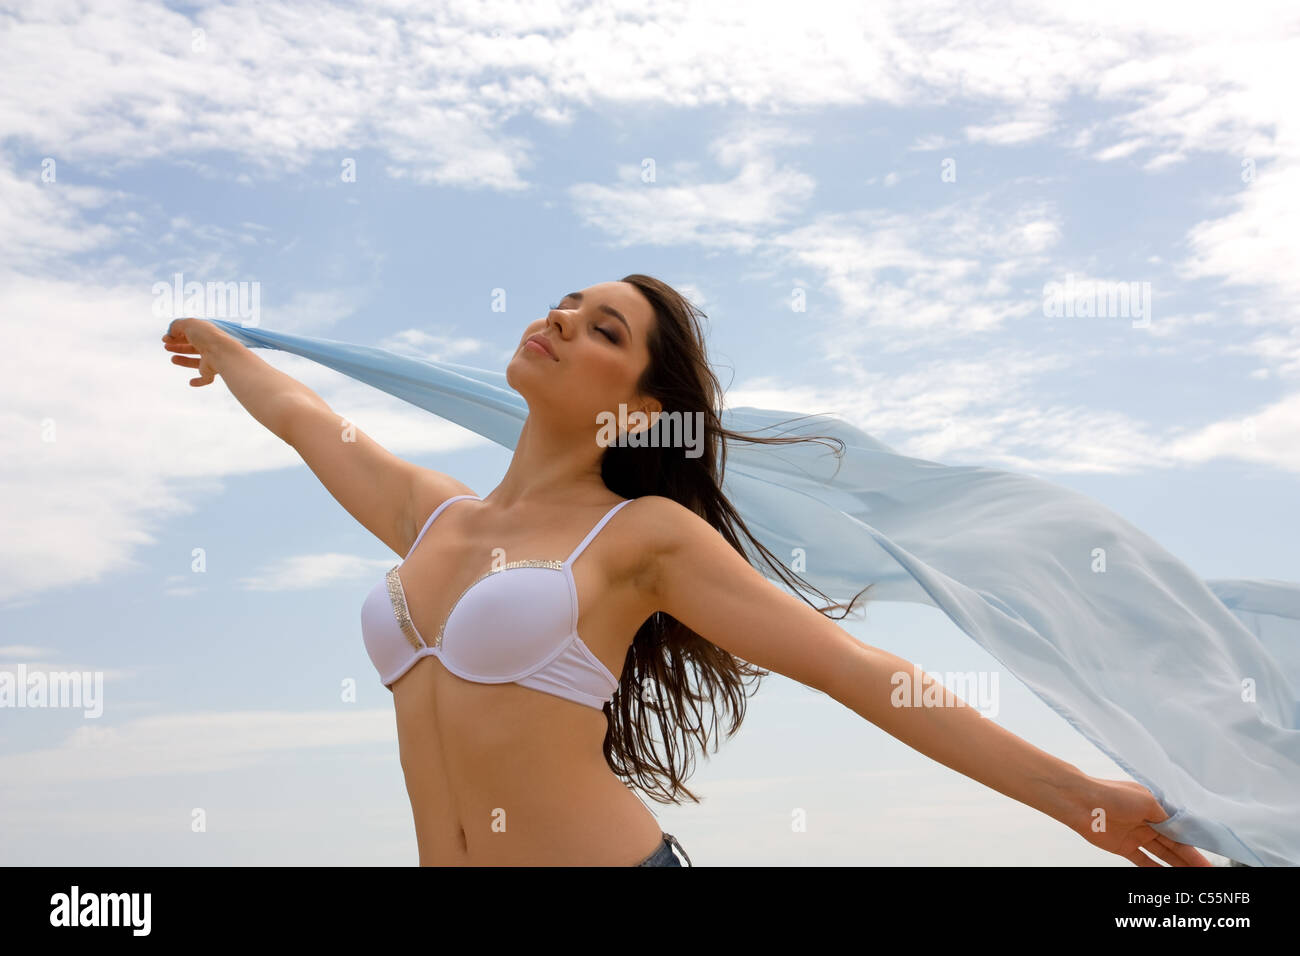 88,600+ Women Wearing Bras Stock Photos, Pictures & Royalty-Free Images -  iStock